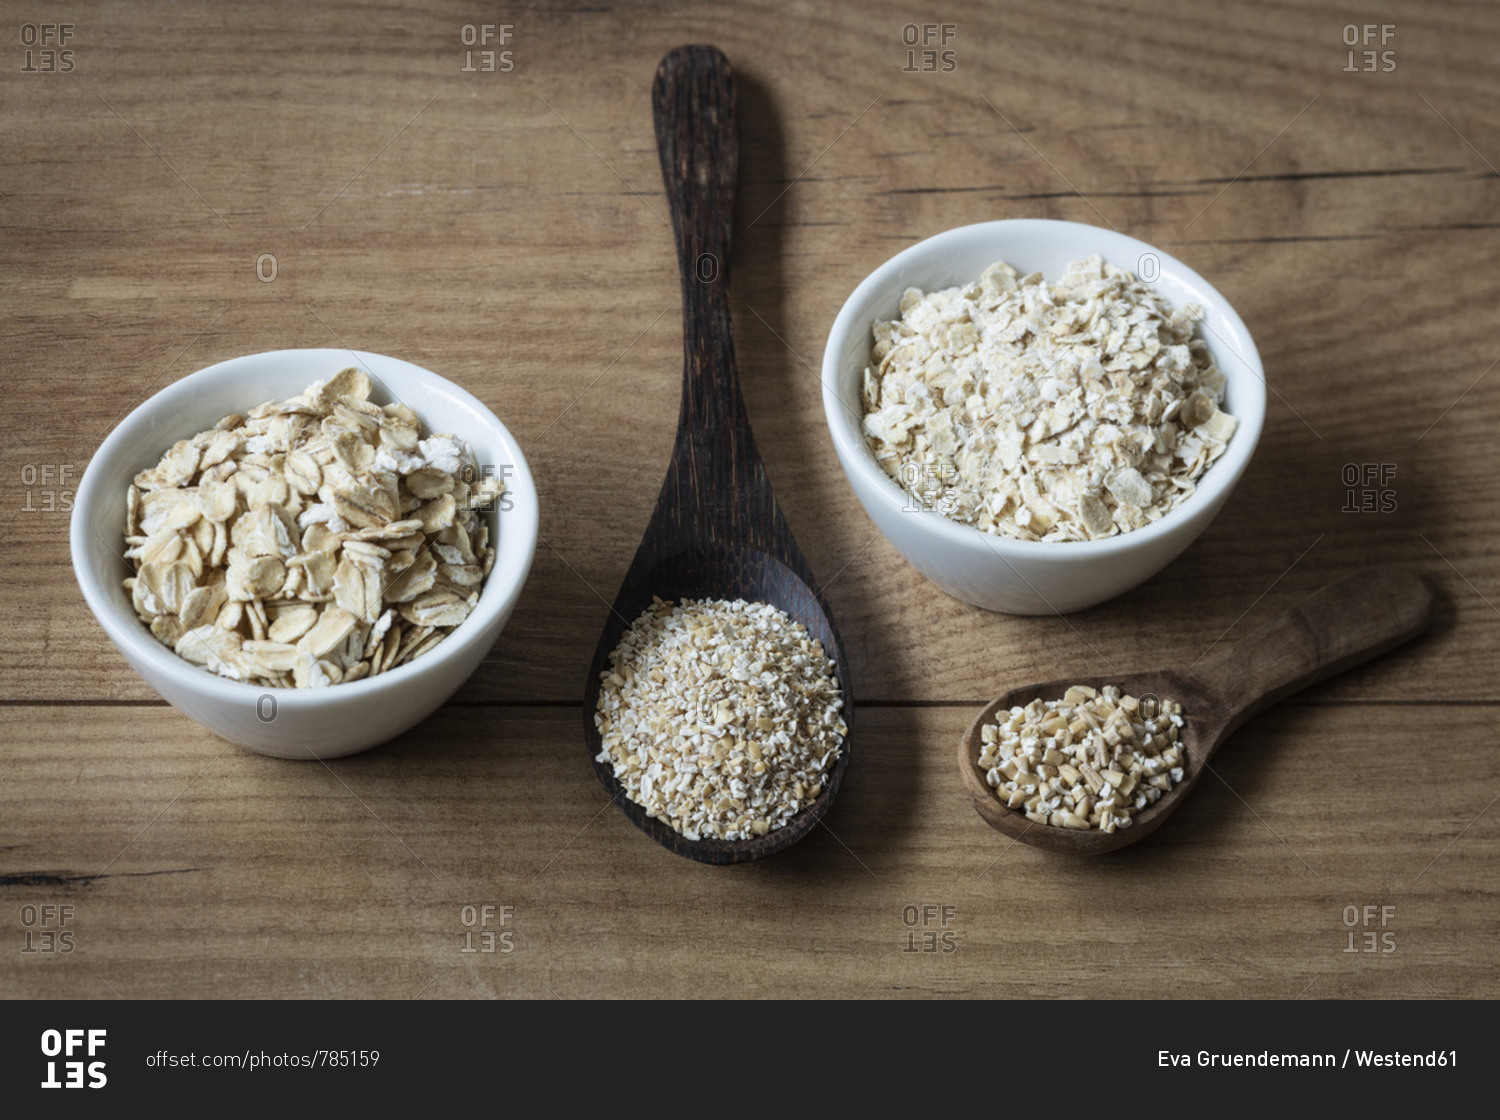 Two variations of oat flakes- oat bran and steel-cut oats